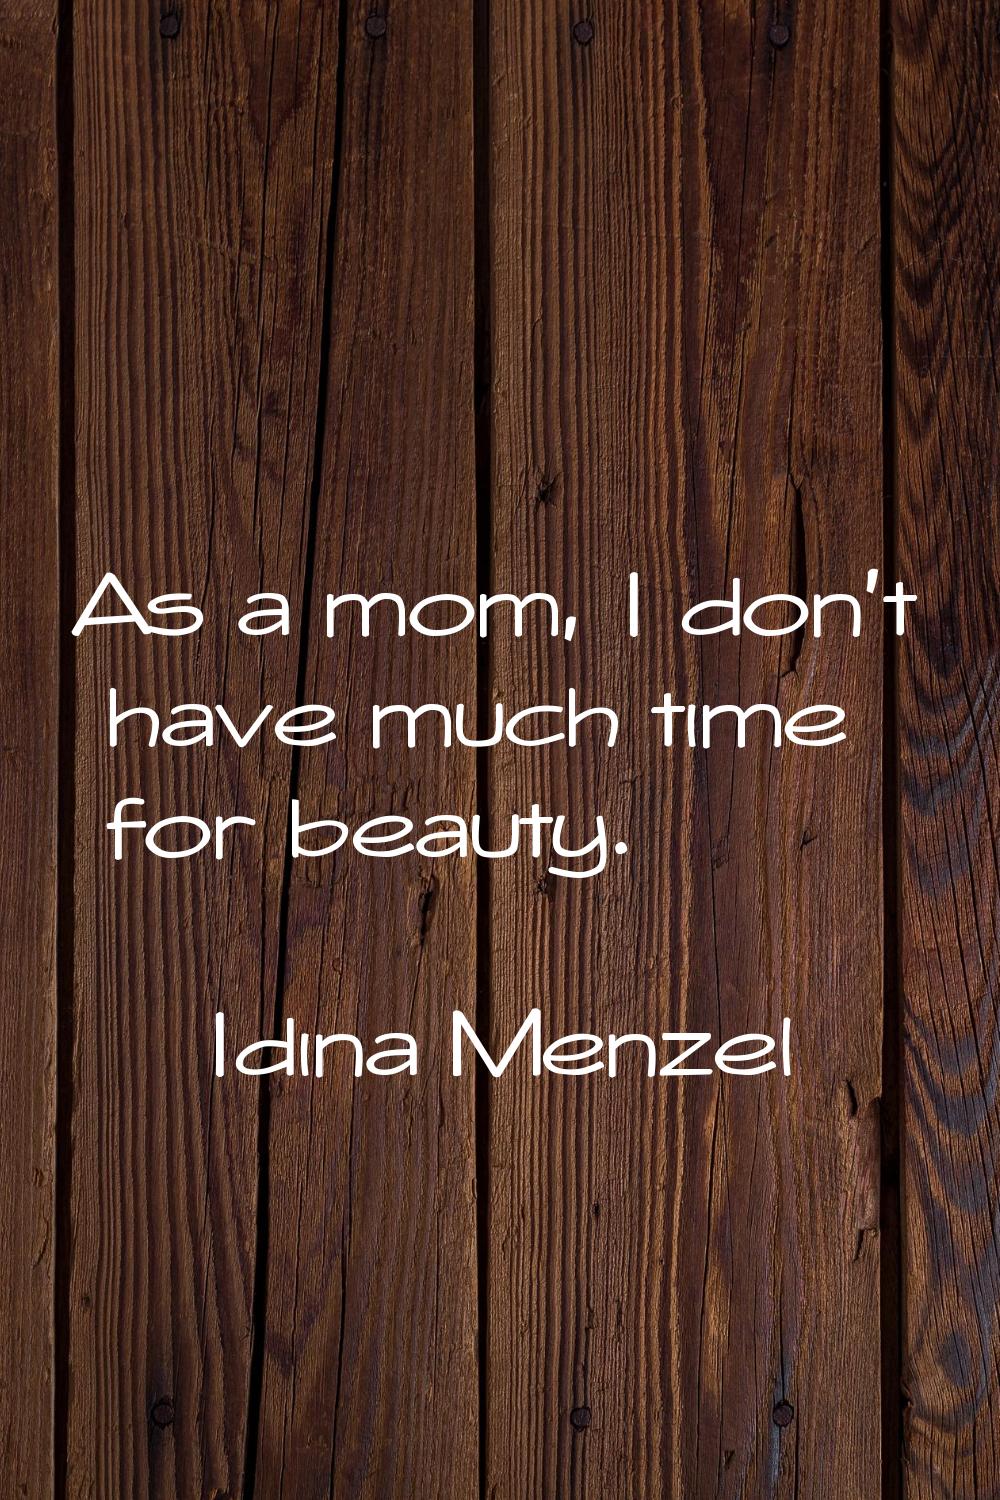 As a mom, I don't have much time for beauty.